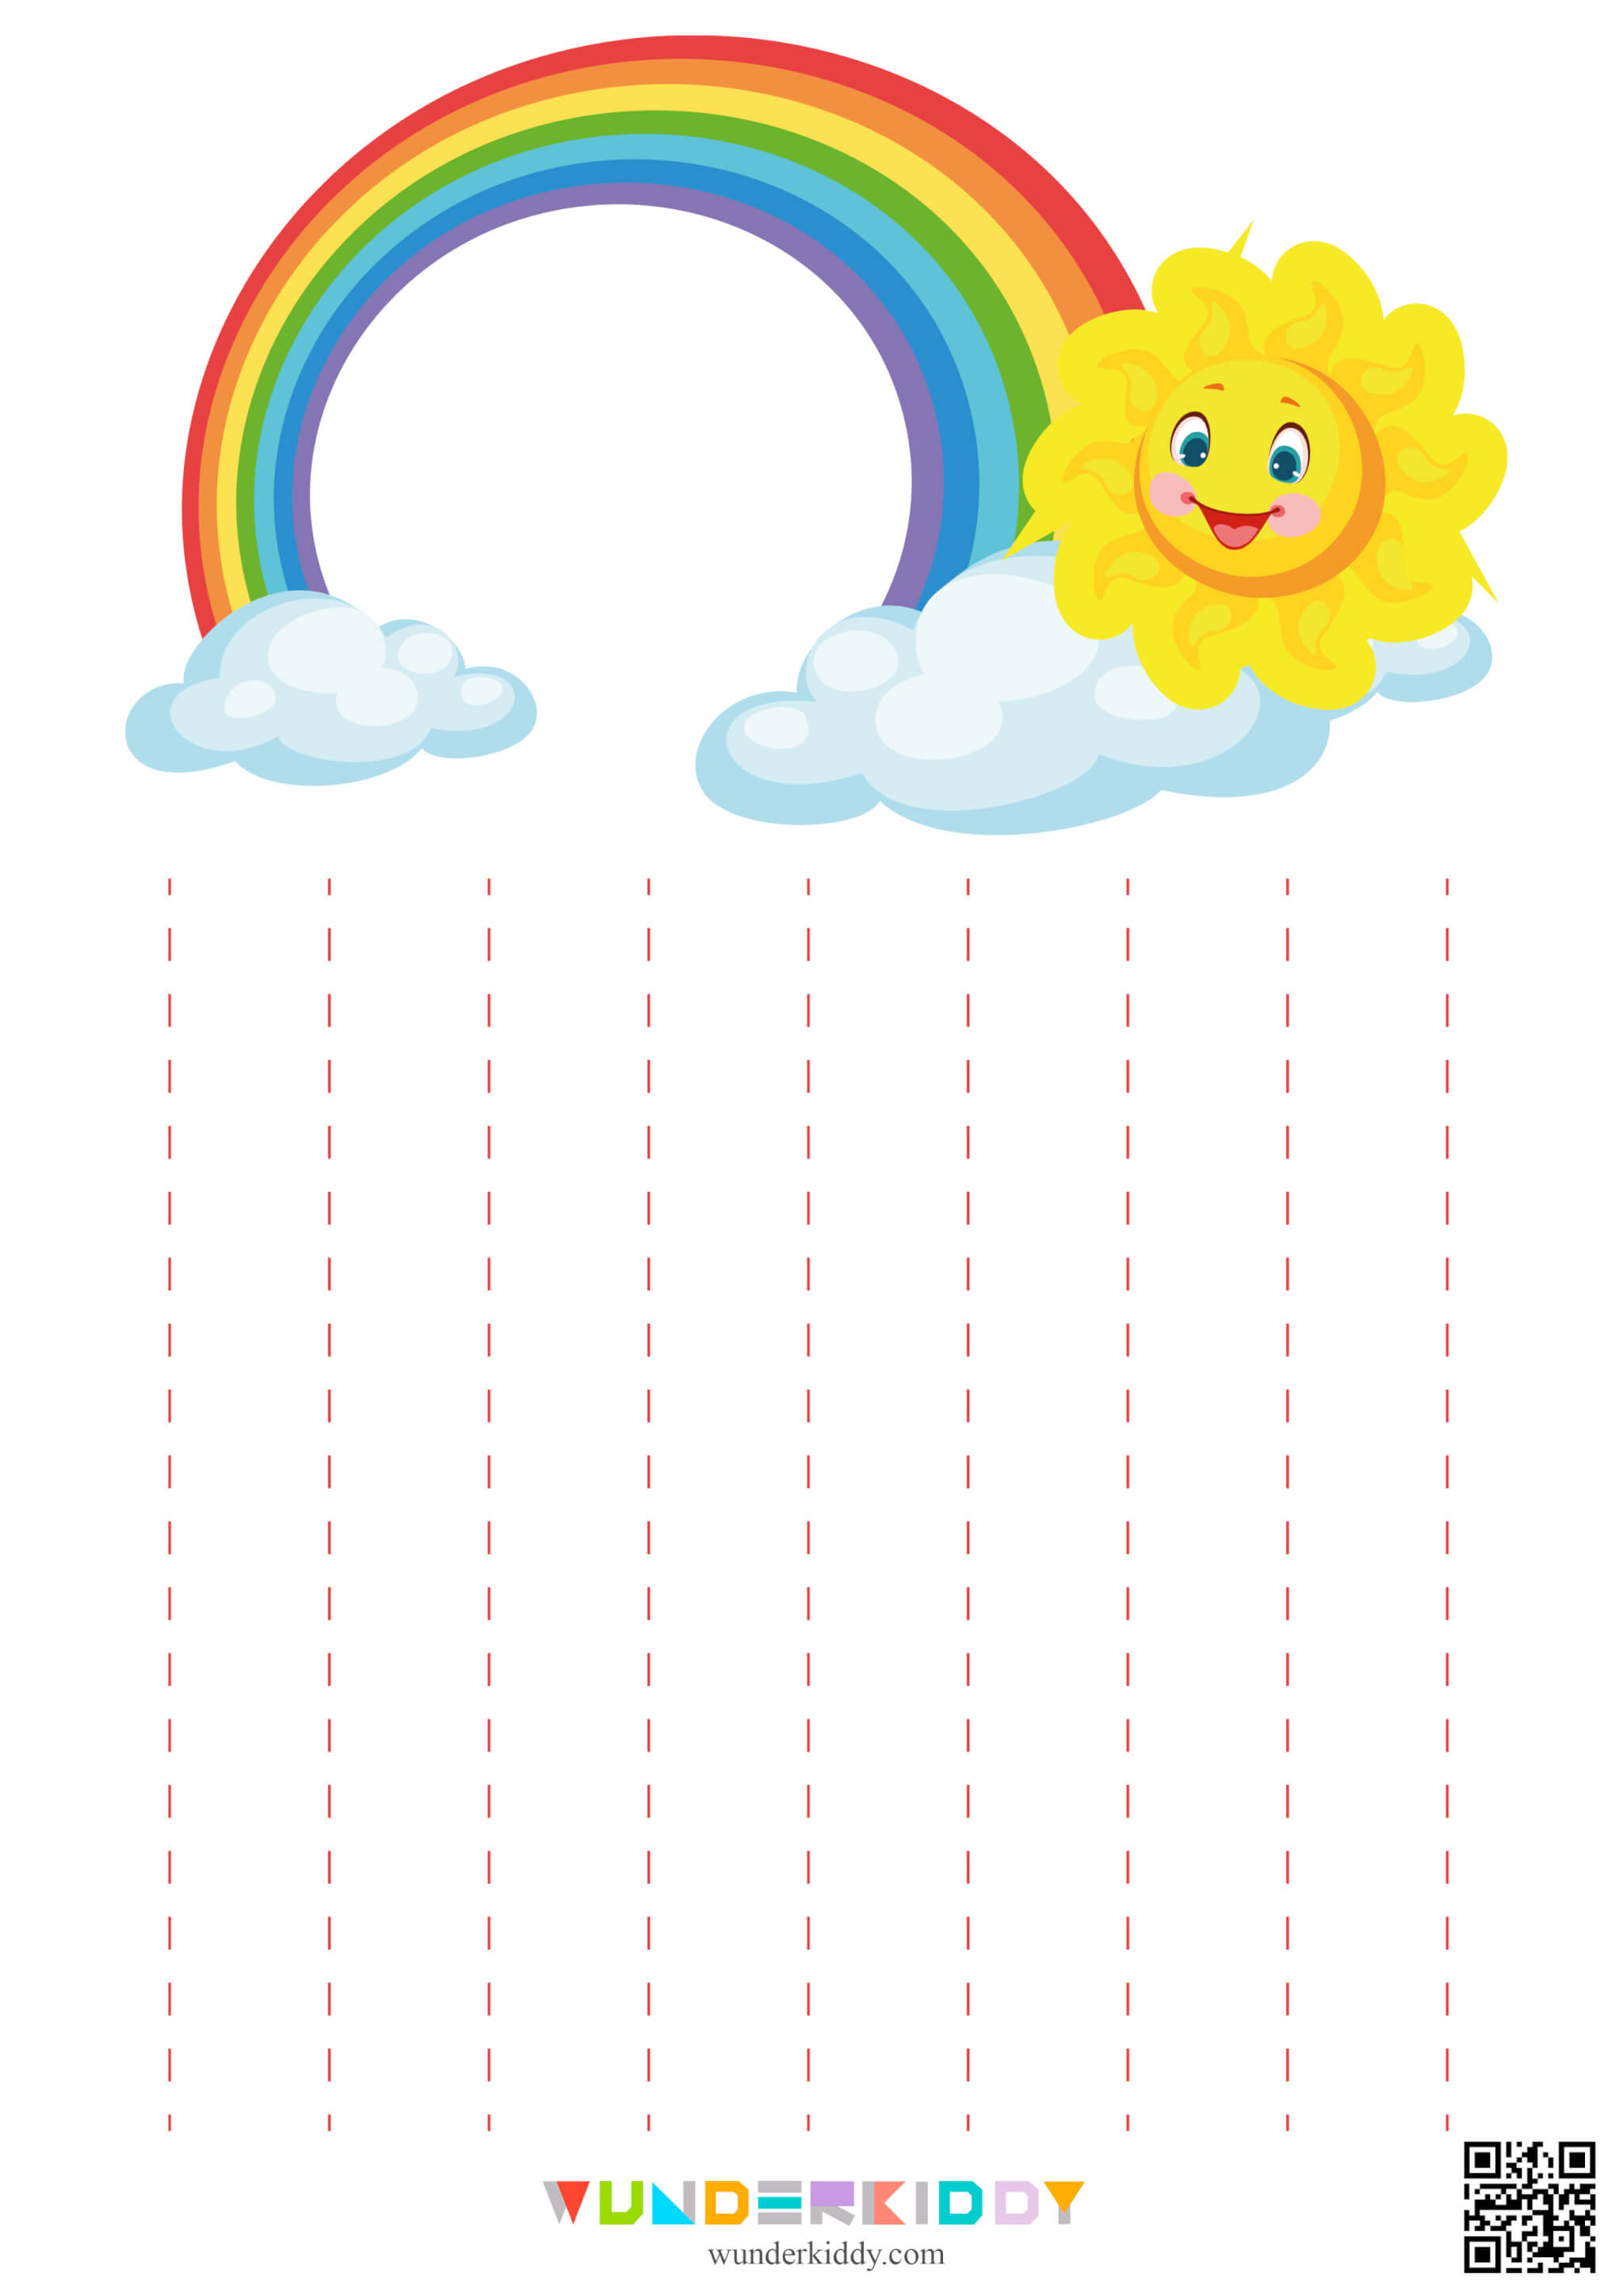 Worksheets «Sun and rainbow» - Image 2